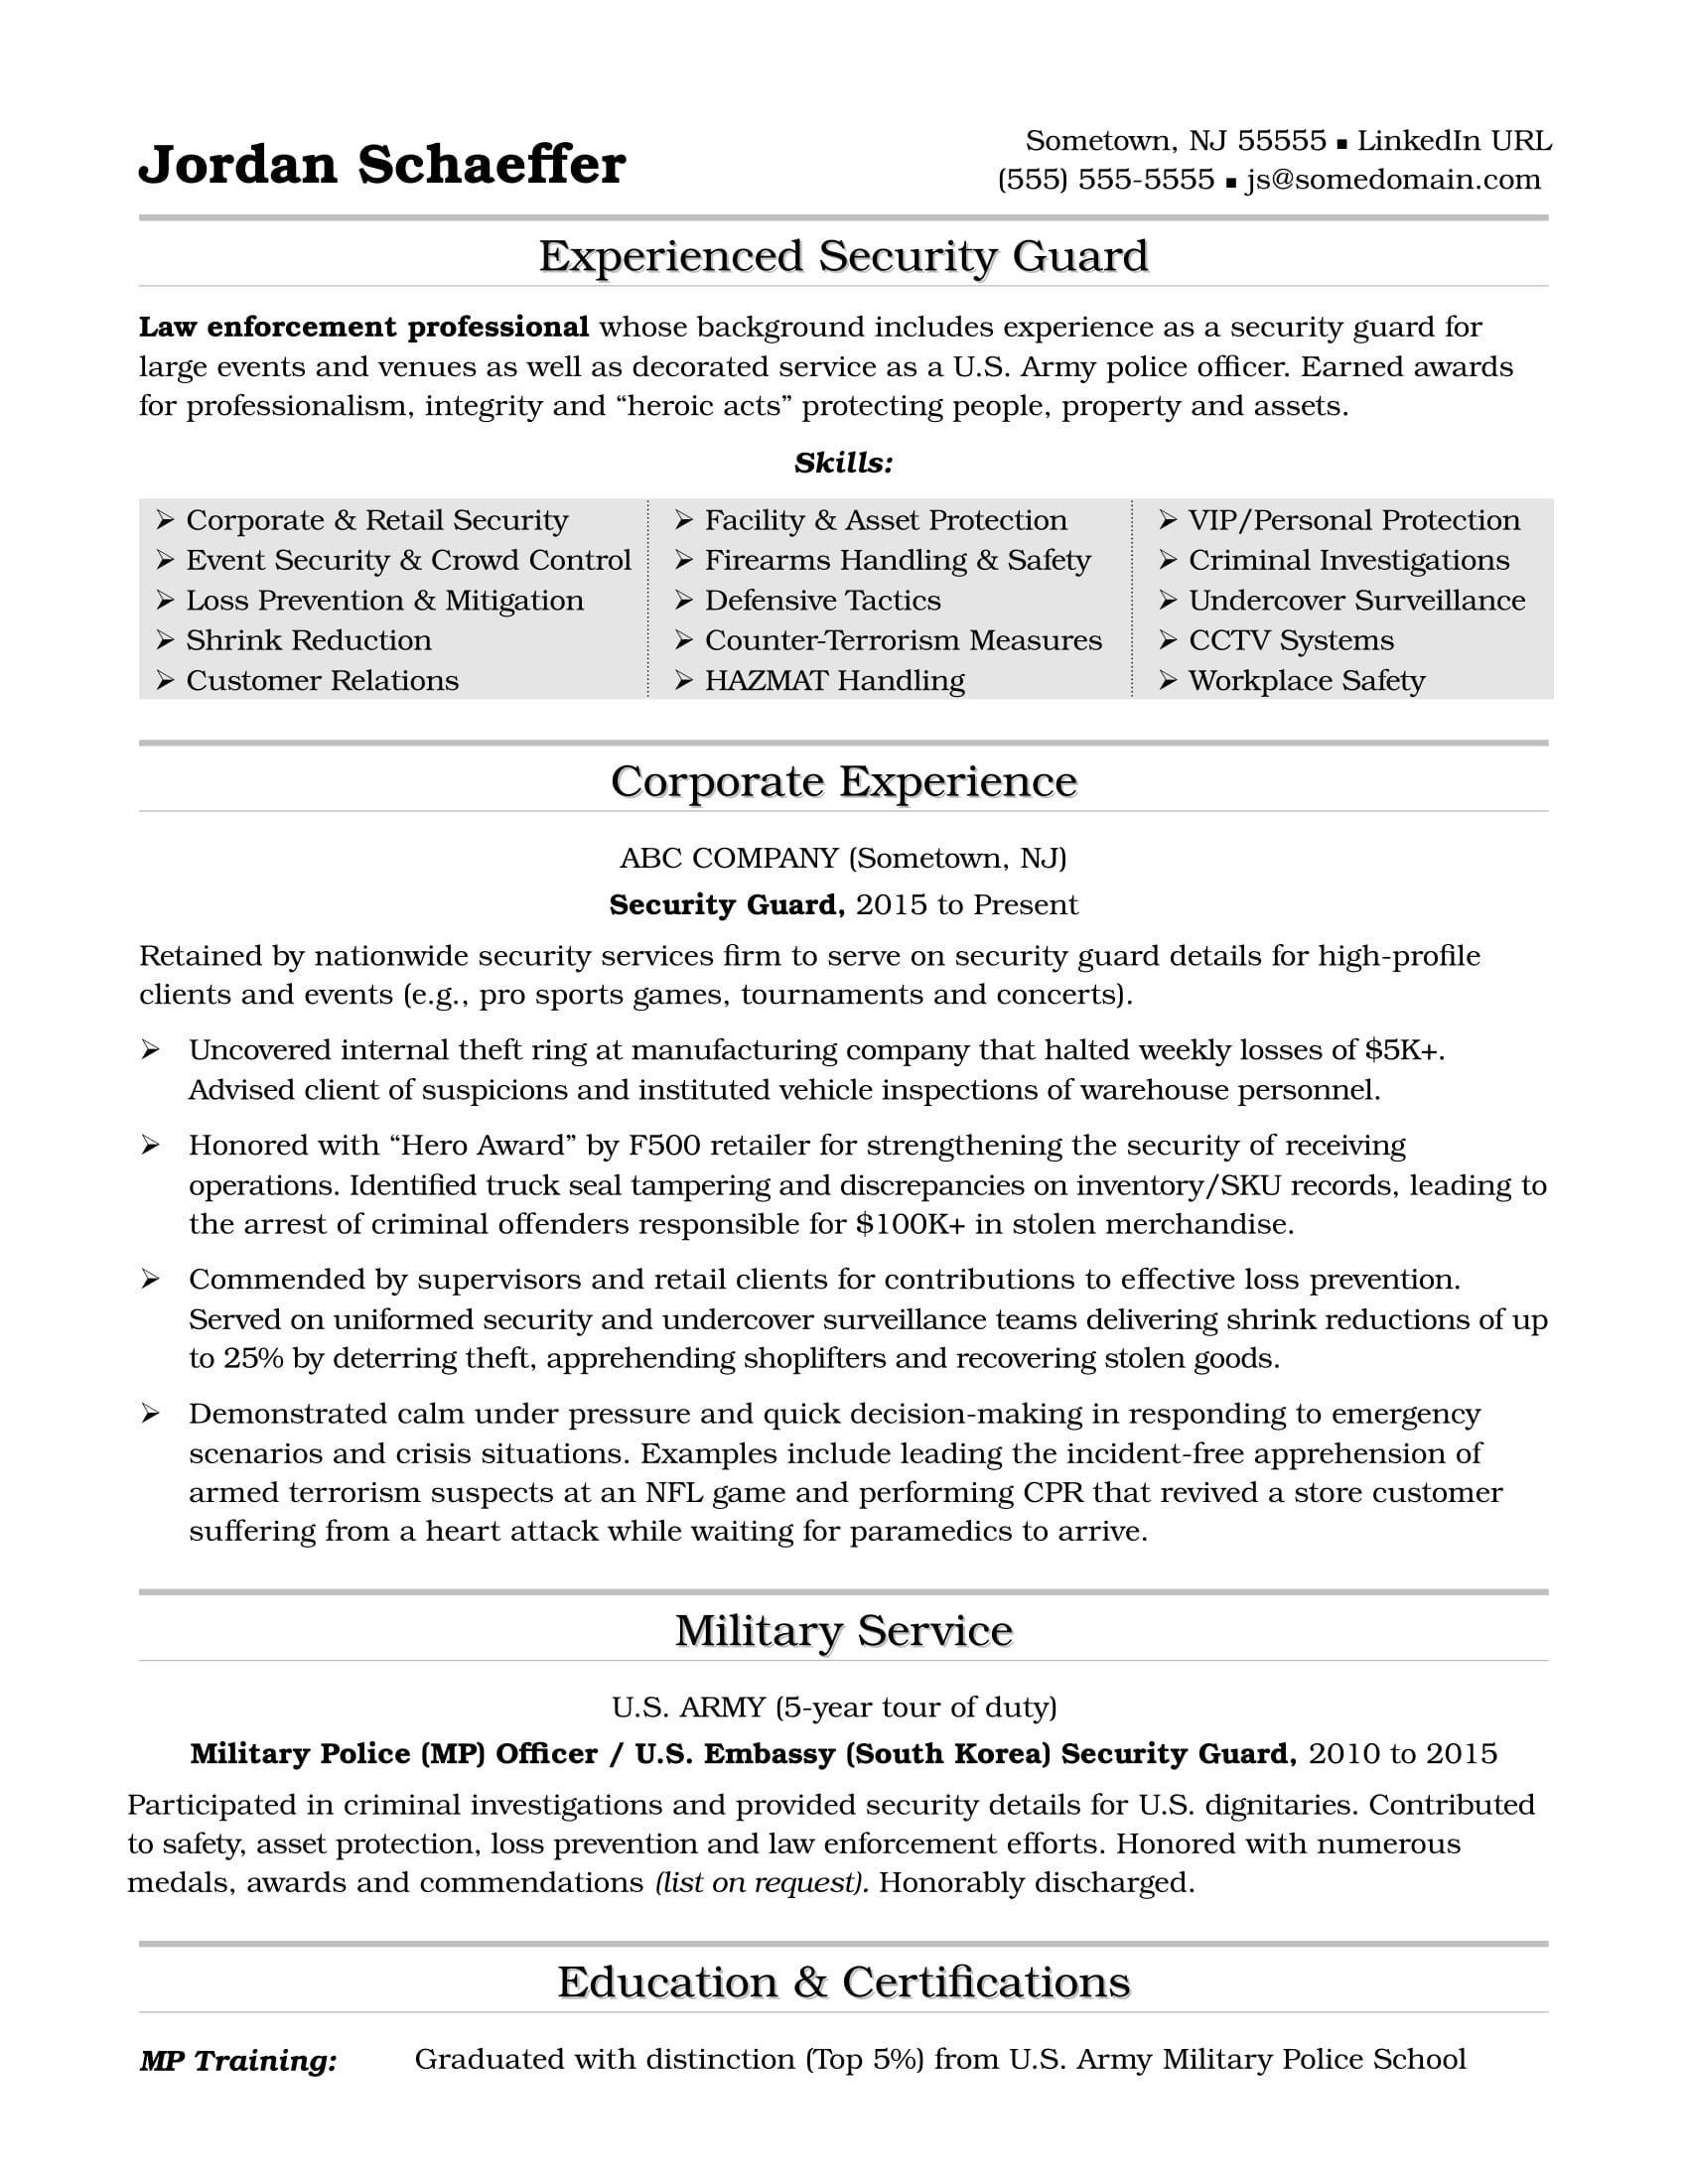 Sample Resume for Police Officer with No Experience Security Guard Resume Sample Security Resume, Job Resume Samples …